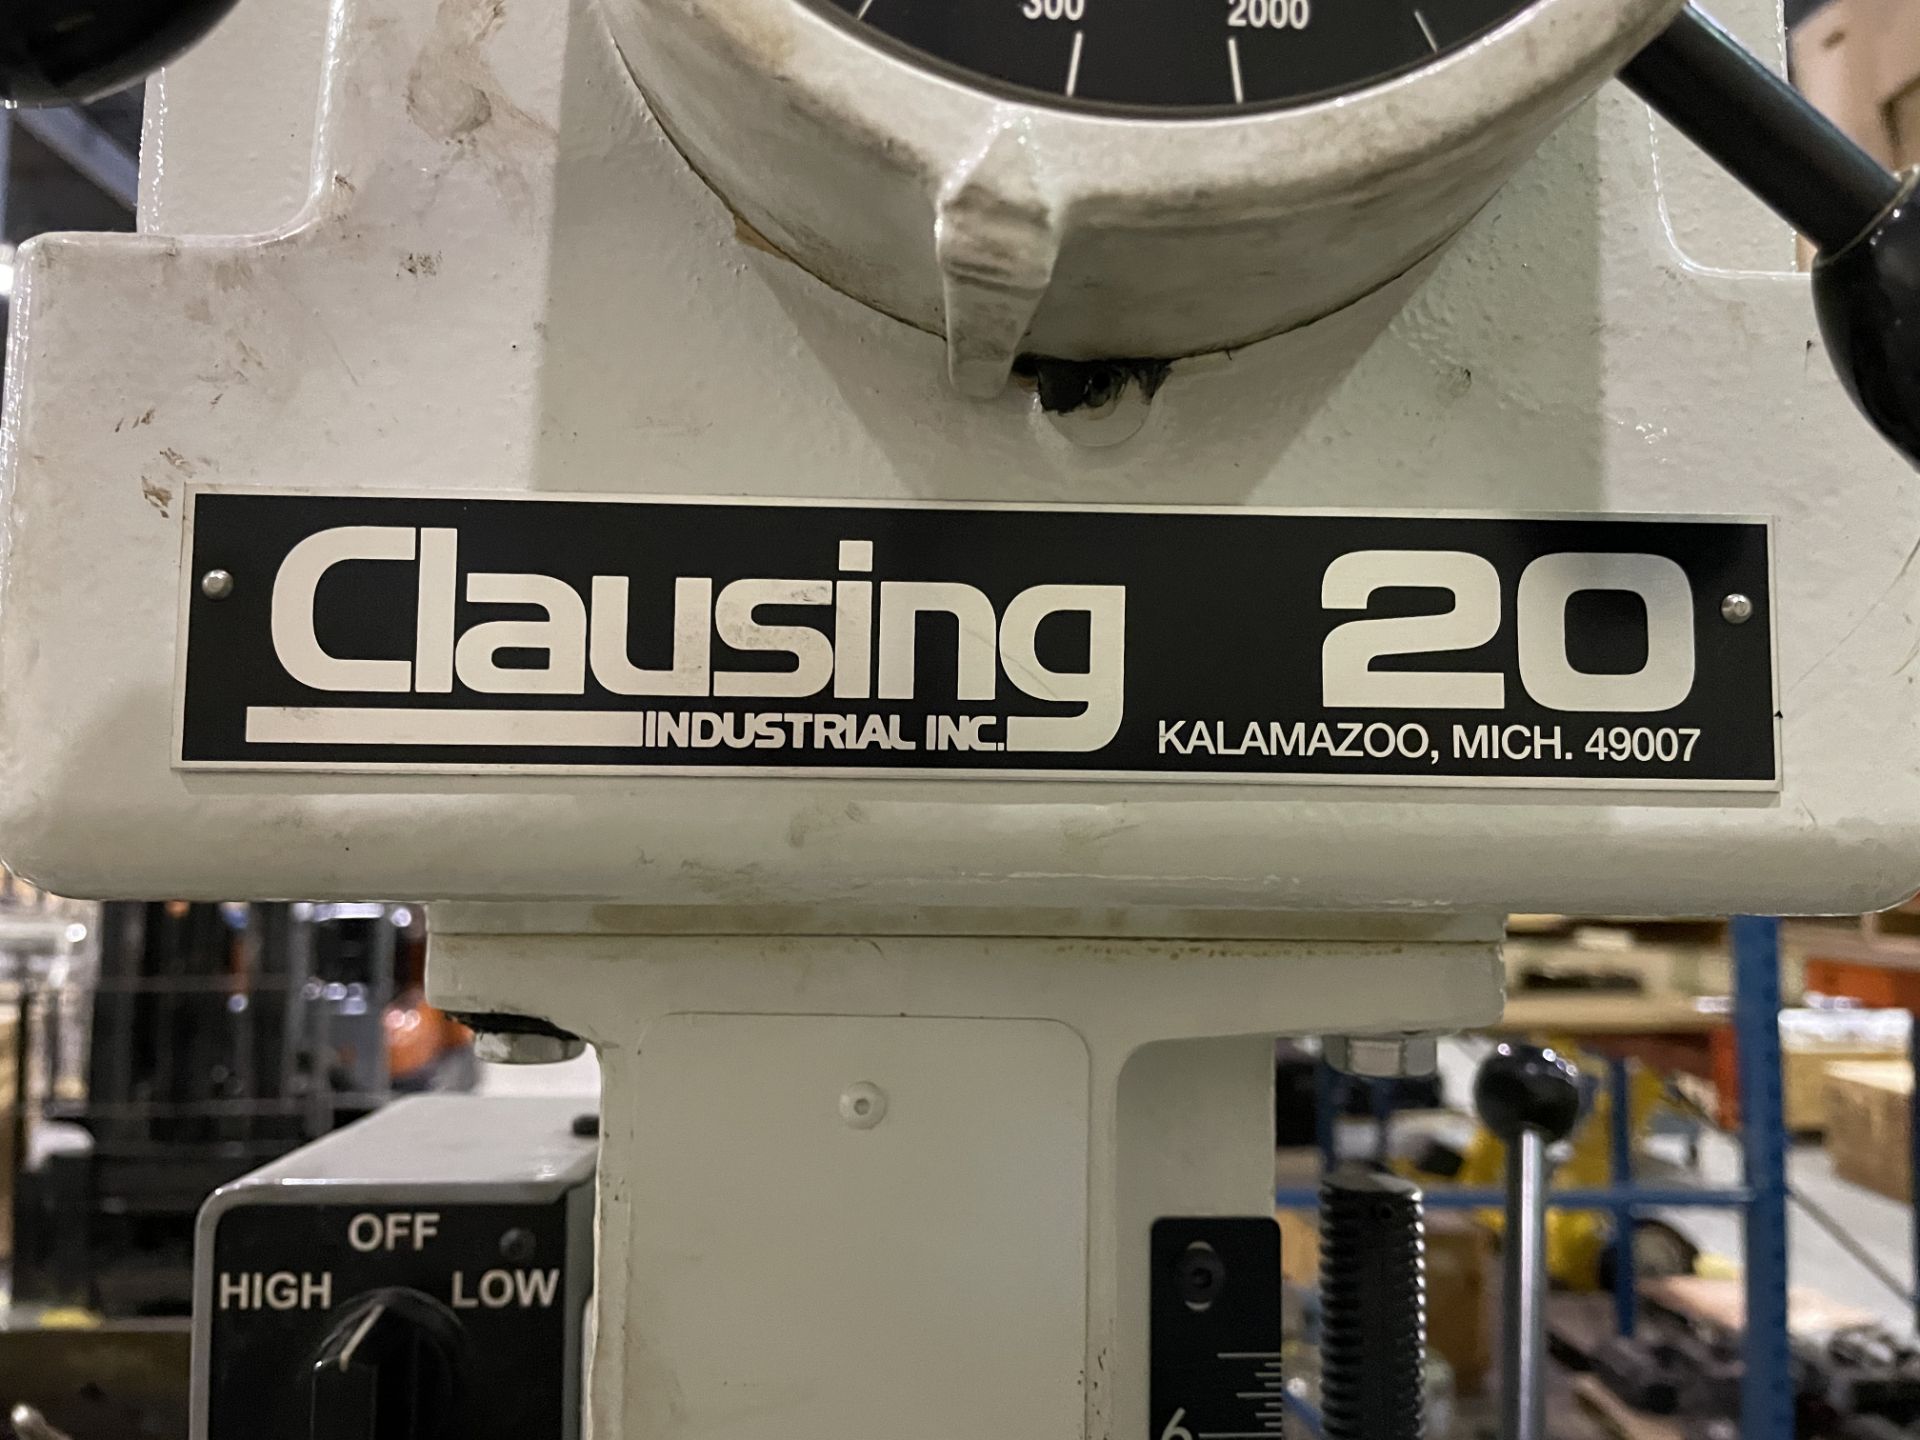 Clausing Drill Press Model 2277 S/N 2M00712 Loading/Rigging Fee $35 - Image 3 of 6